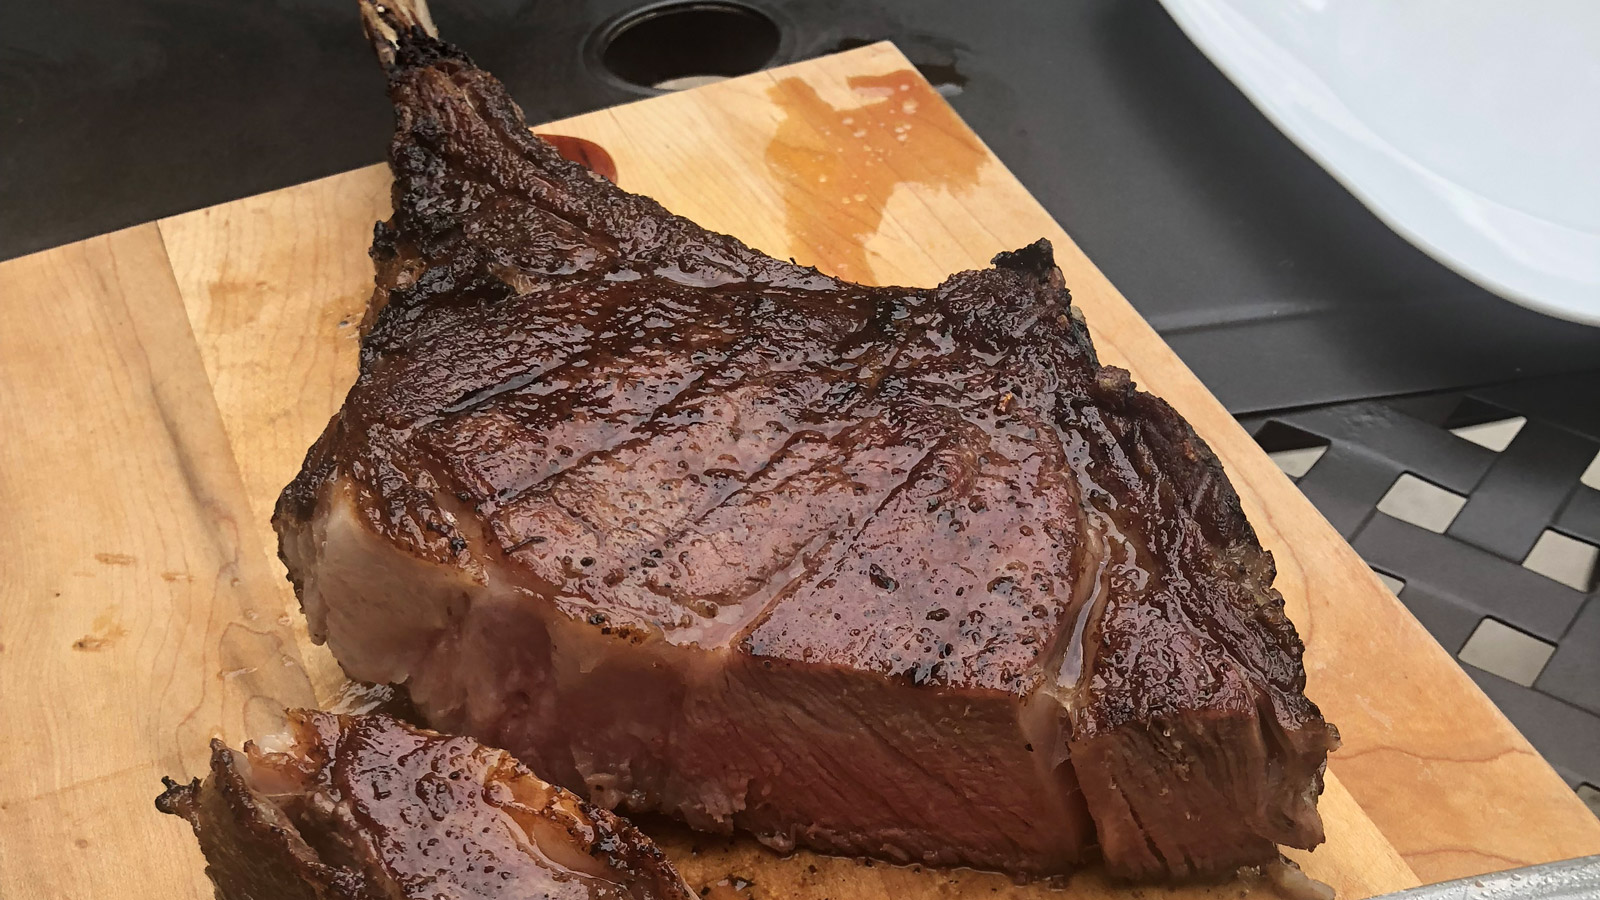 Let's cook! The king of steaks - the Tomahawk steak